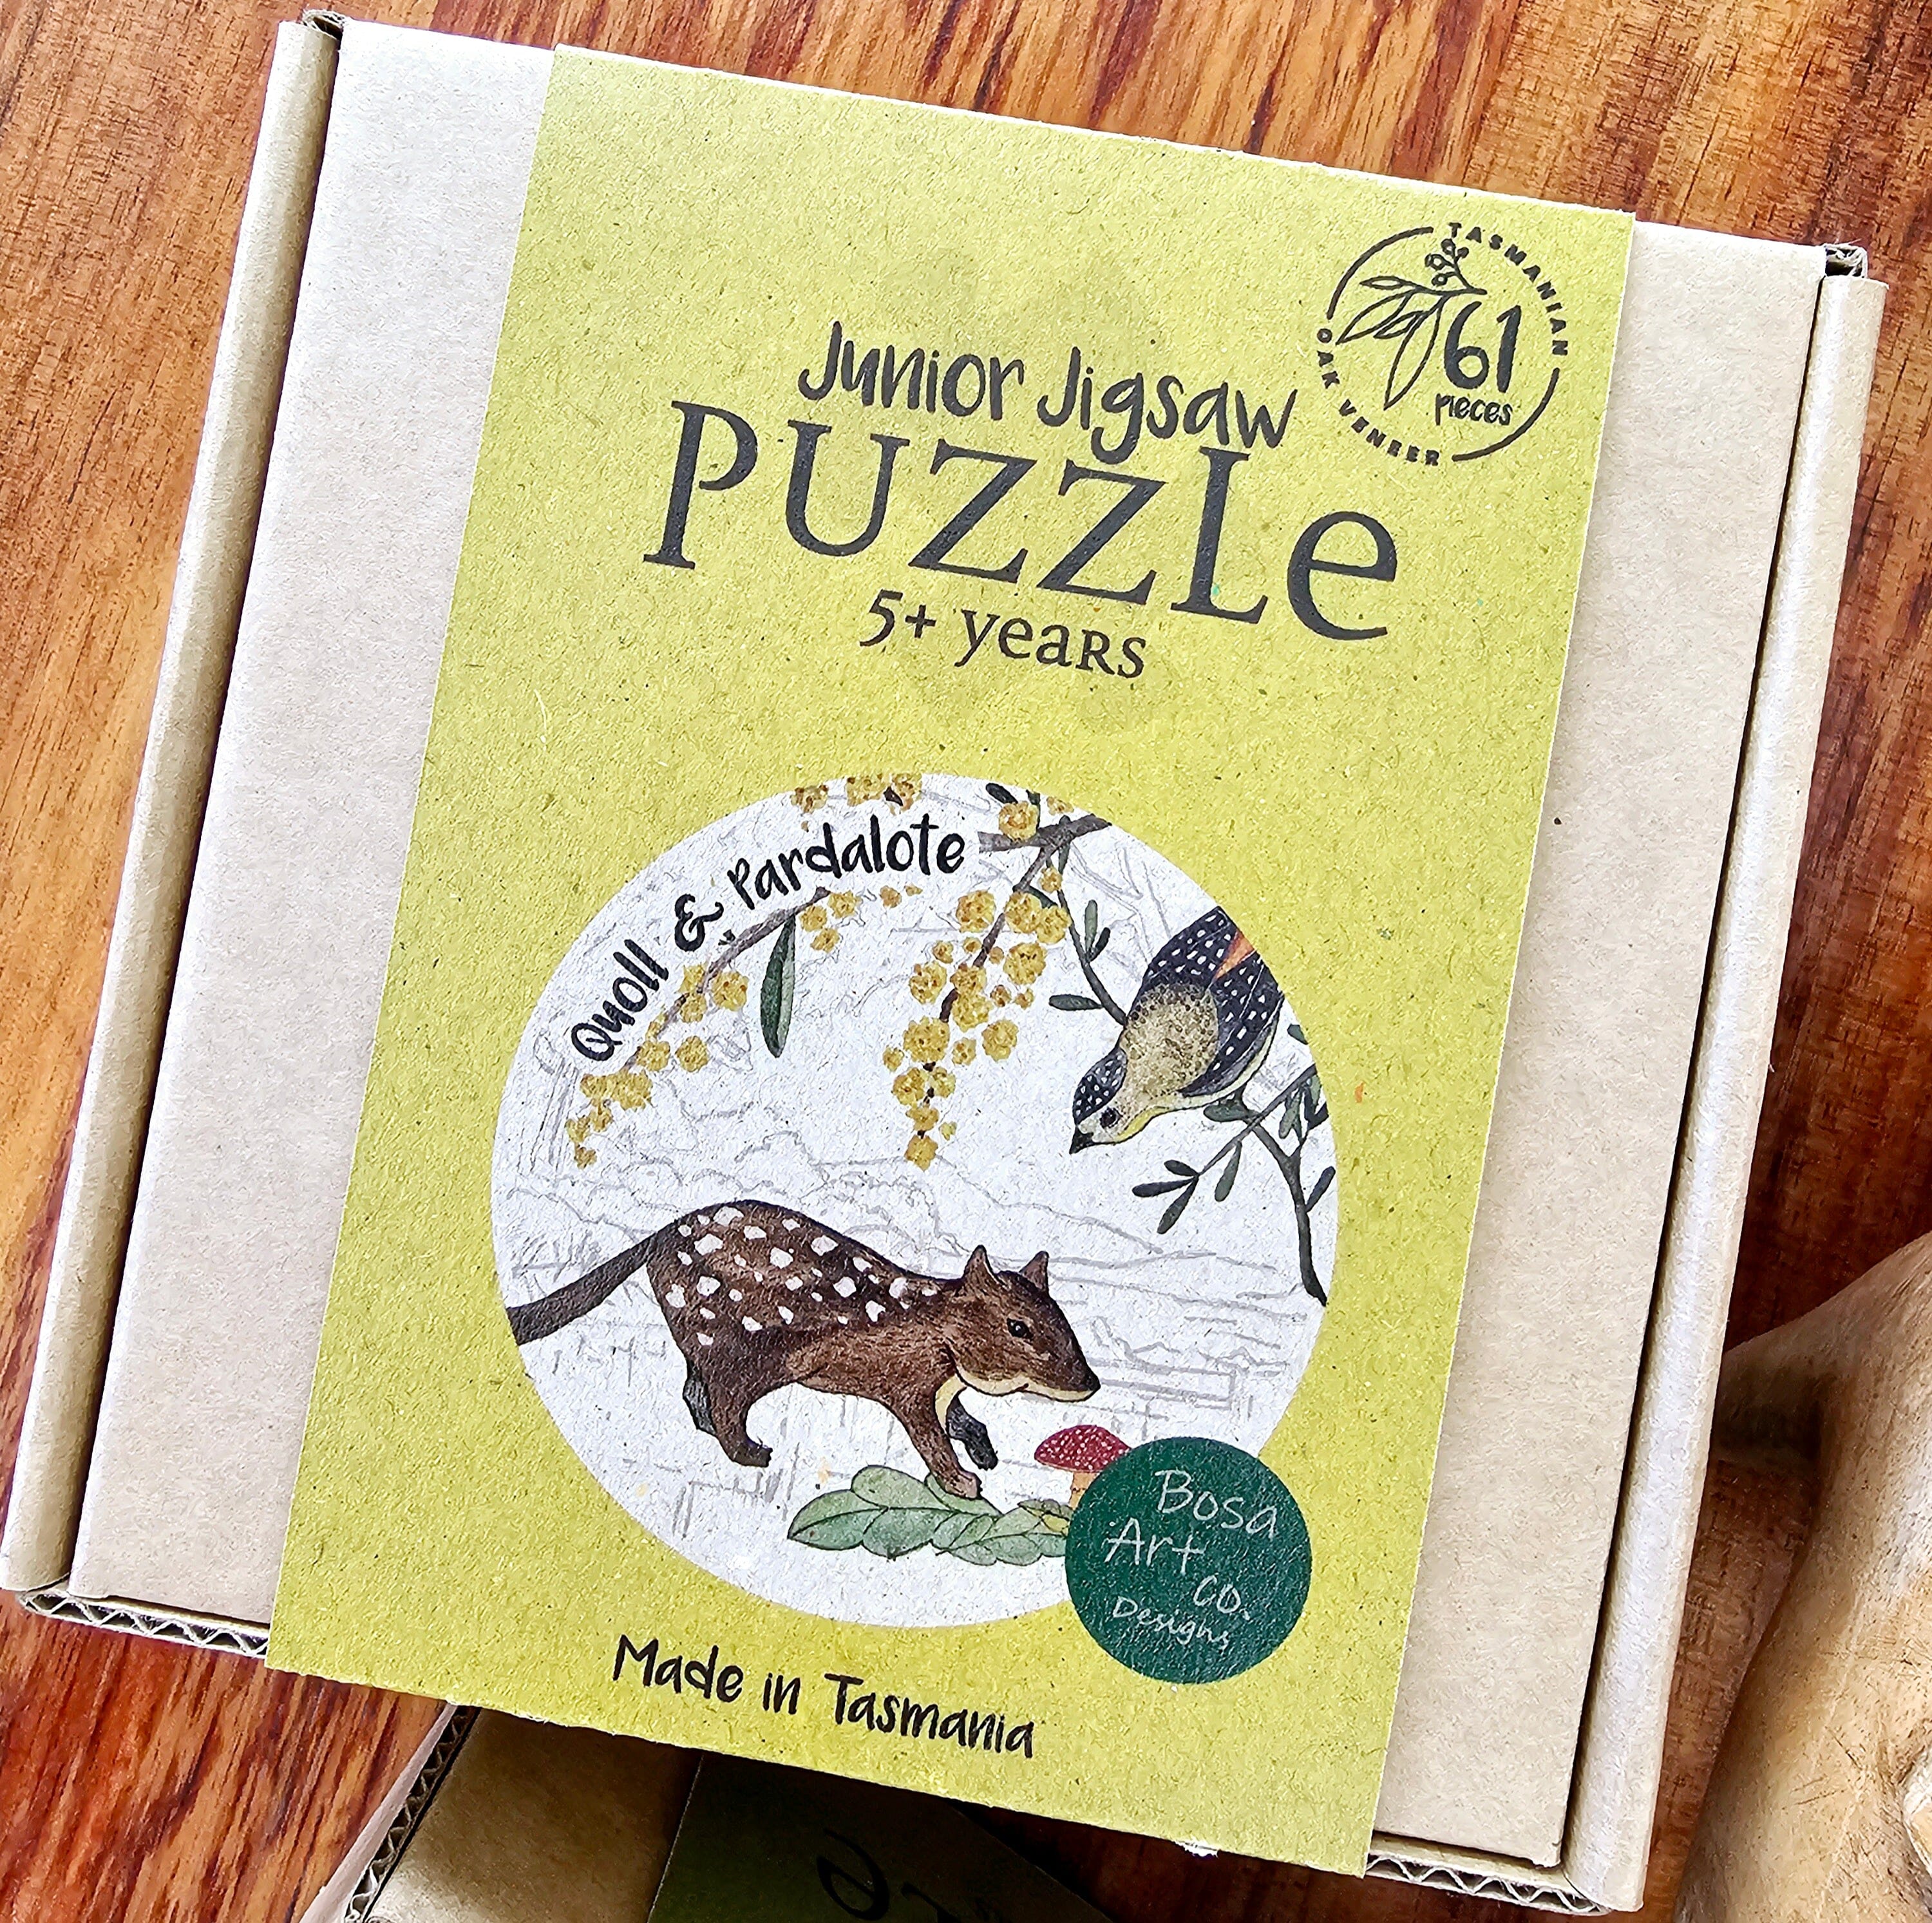 Junior Jigsaw Puzzle - Tasmanian Oak Veneer puzzle The Spotted Quoll Quoll & Pardalote 